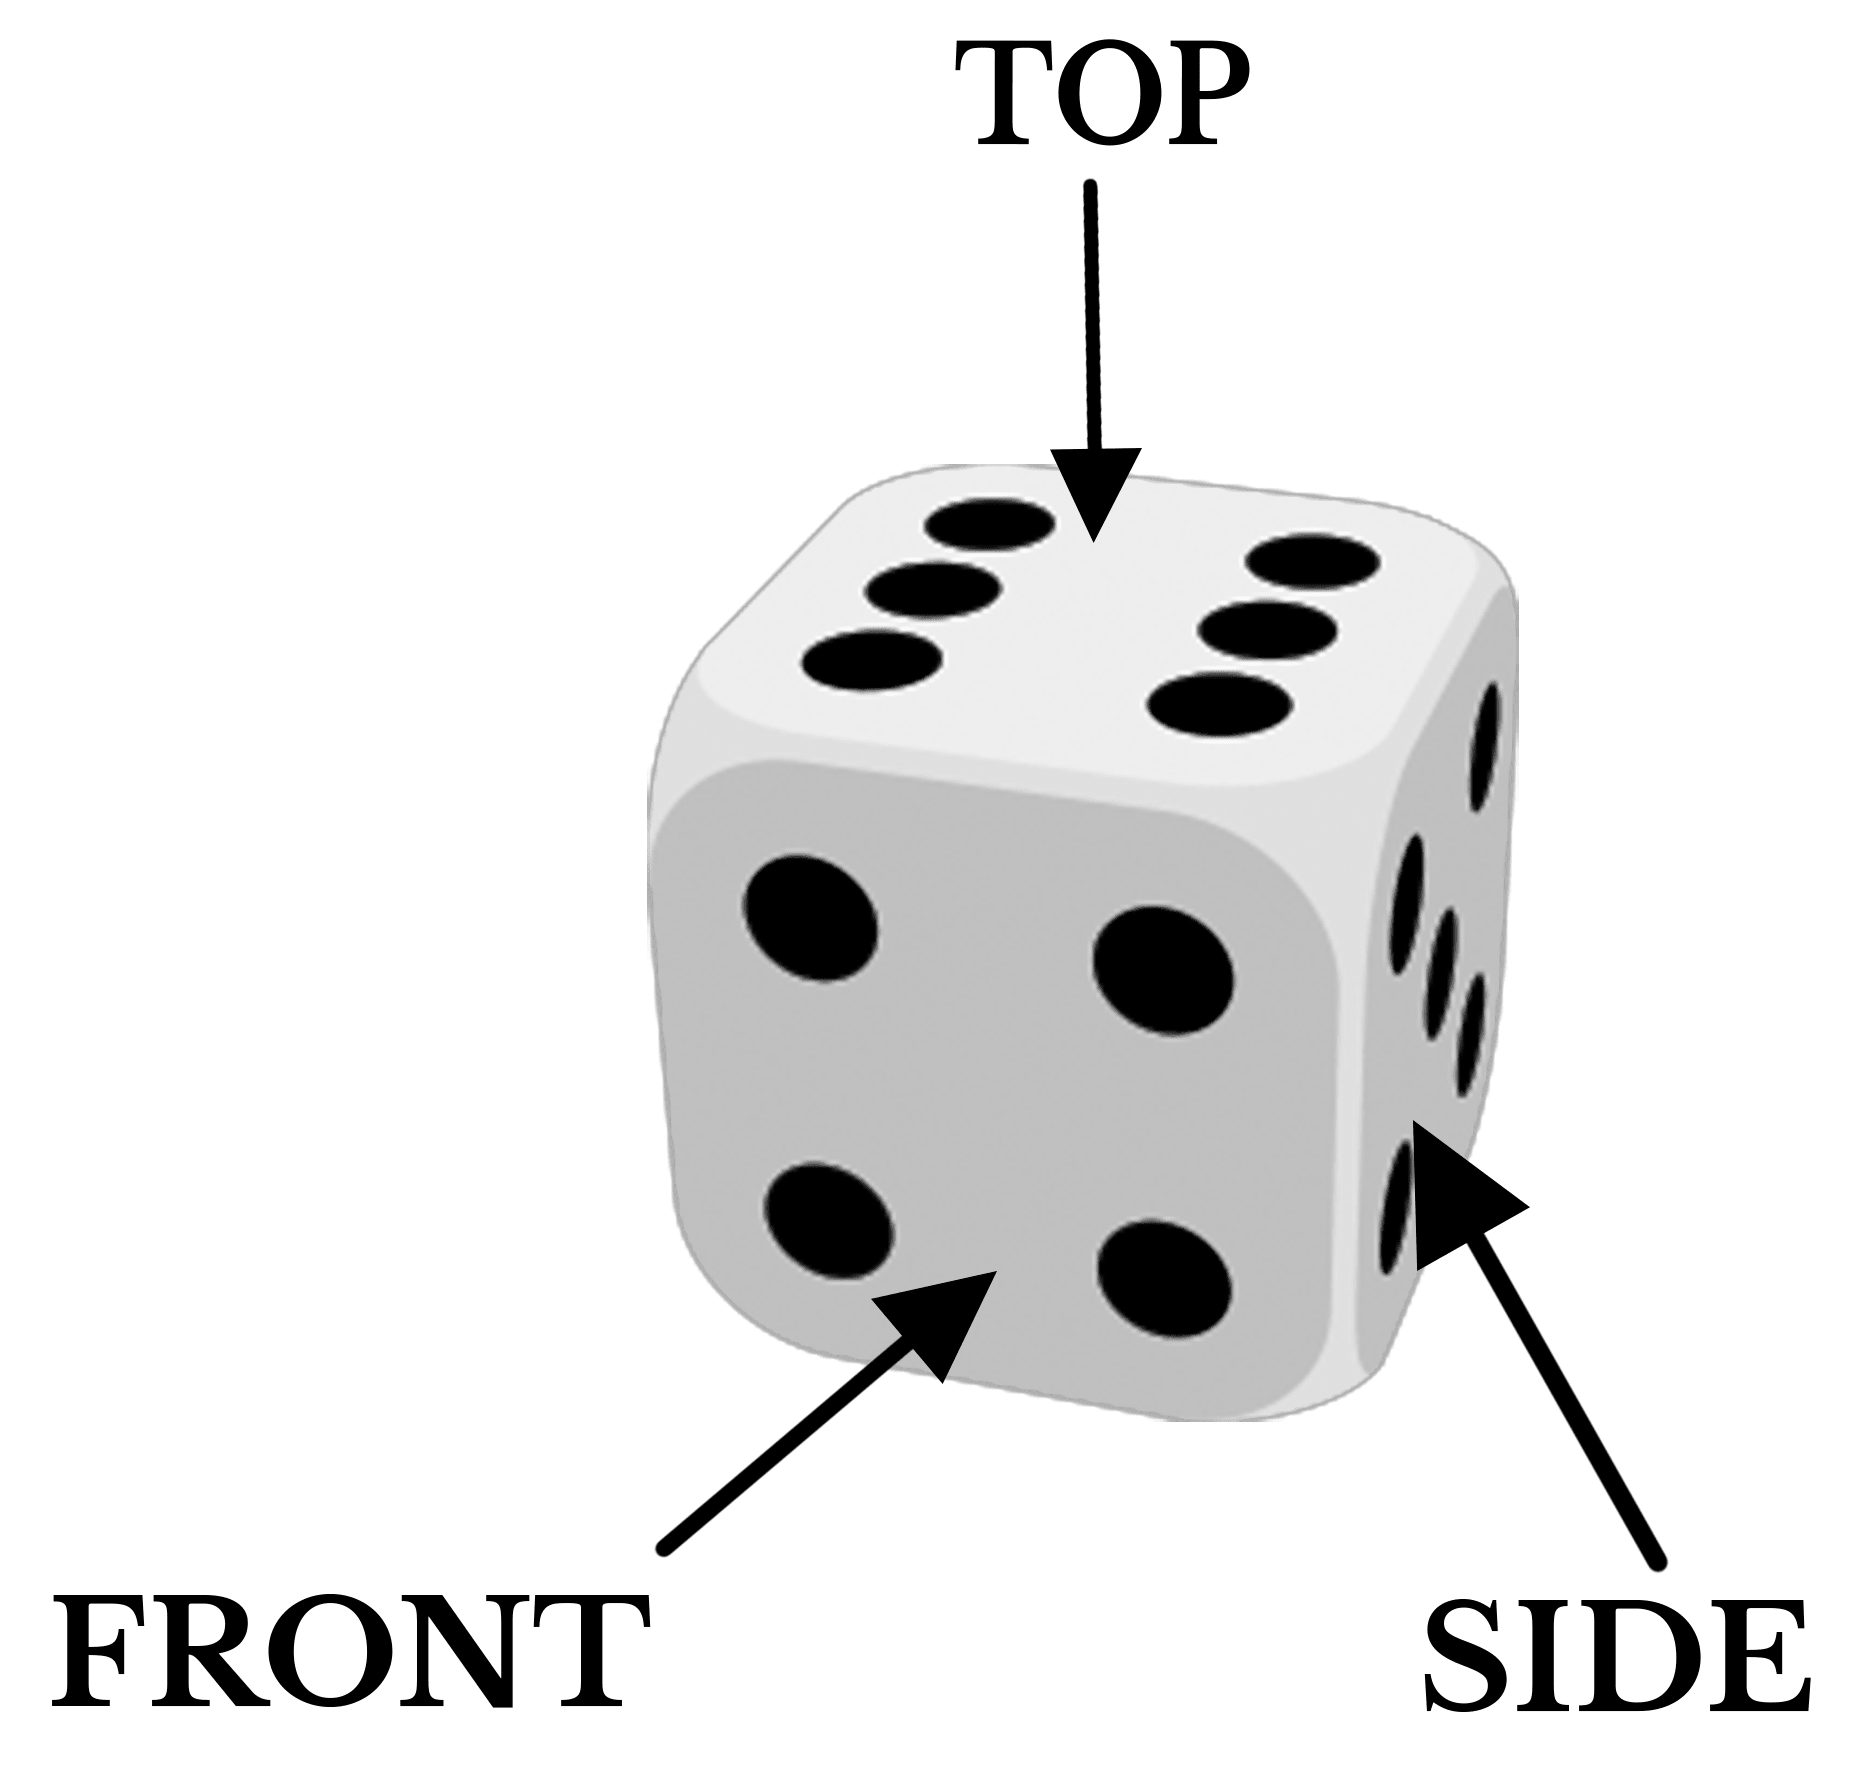 A dice Front view